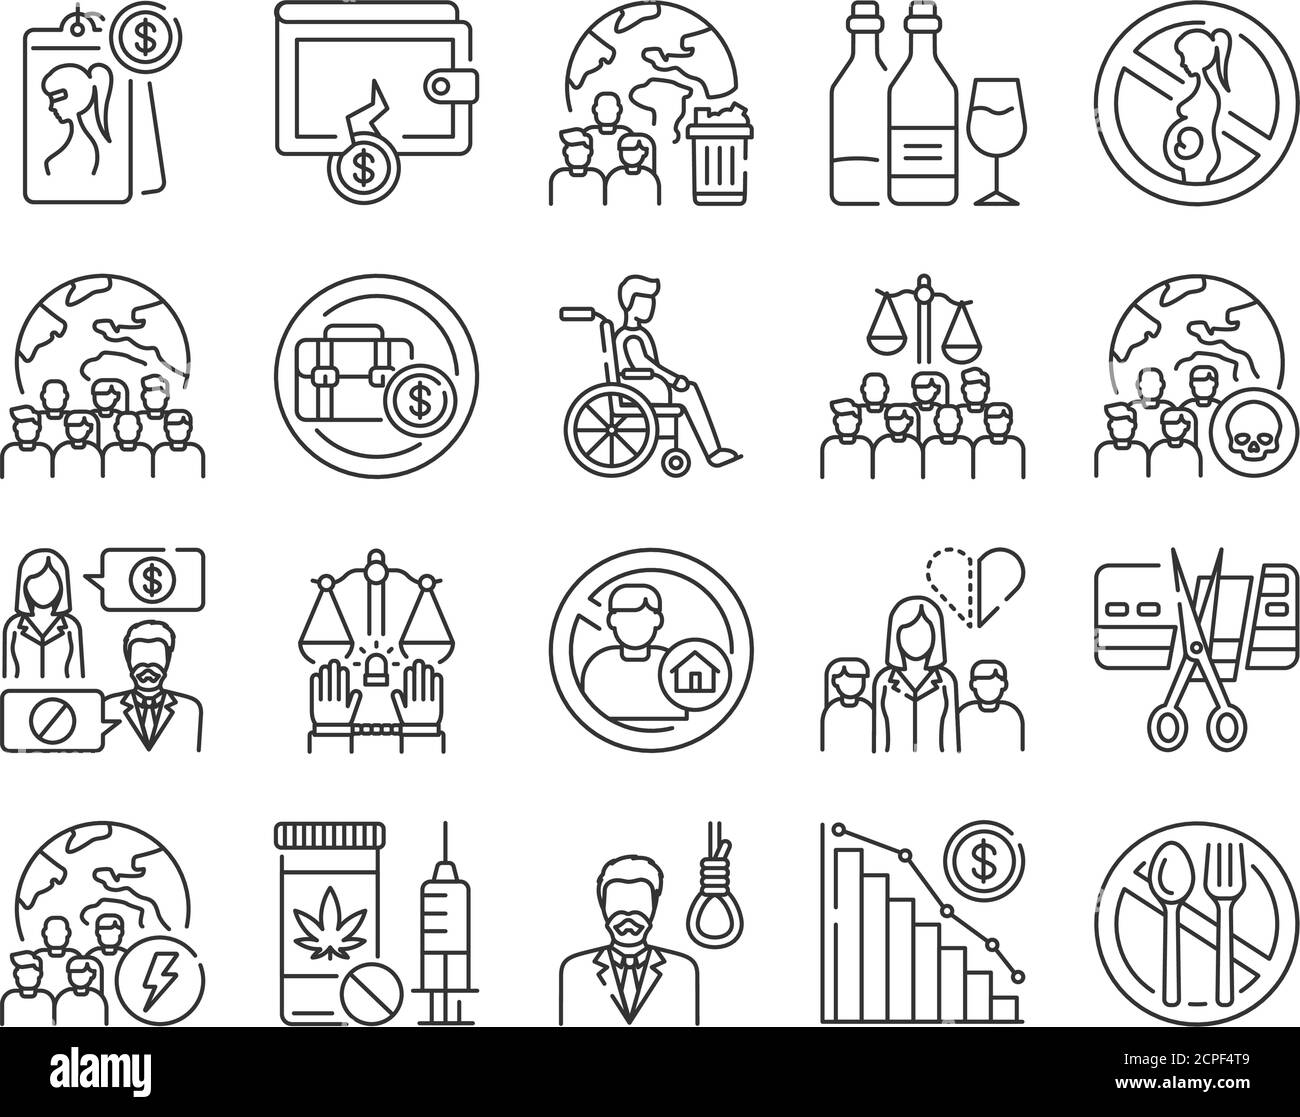 Social problem black line icon. Poverty, bankruptcy, inequality, disability, prostitution, planet pollution, suicide, parent single. Sign for web page Stock Vector